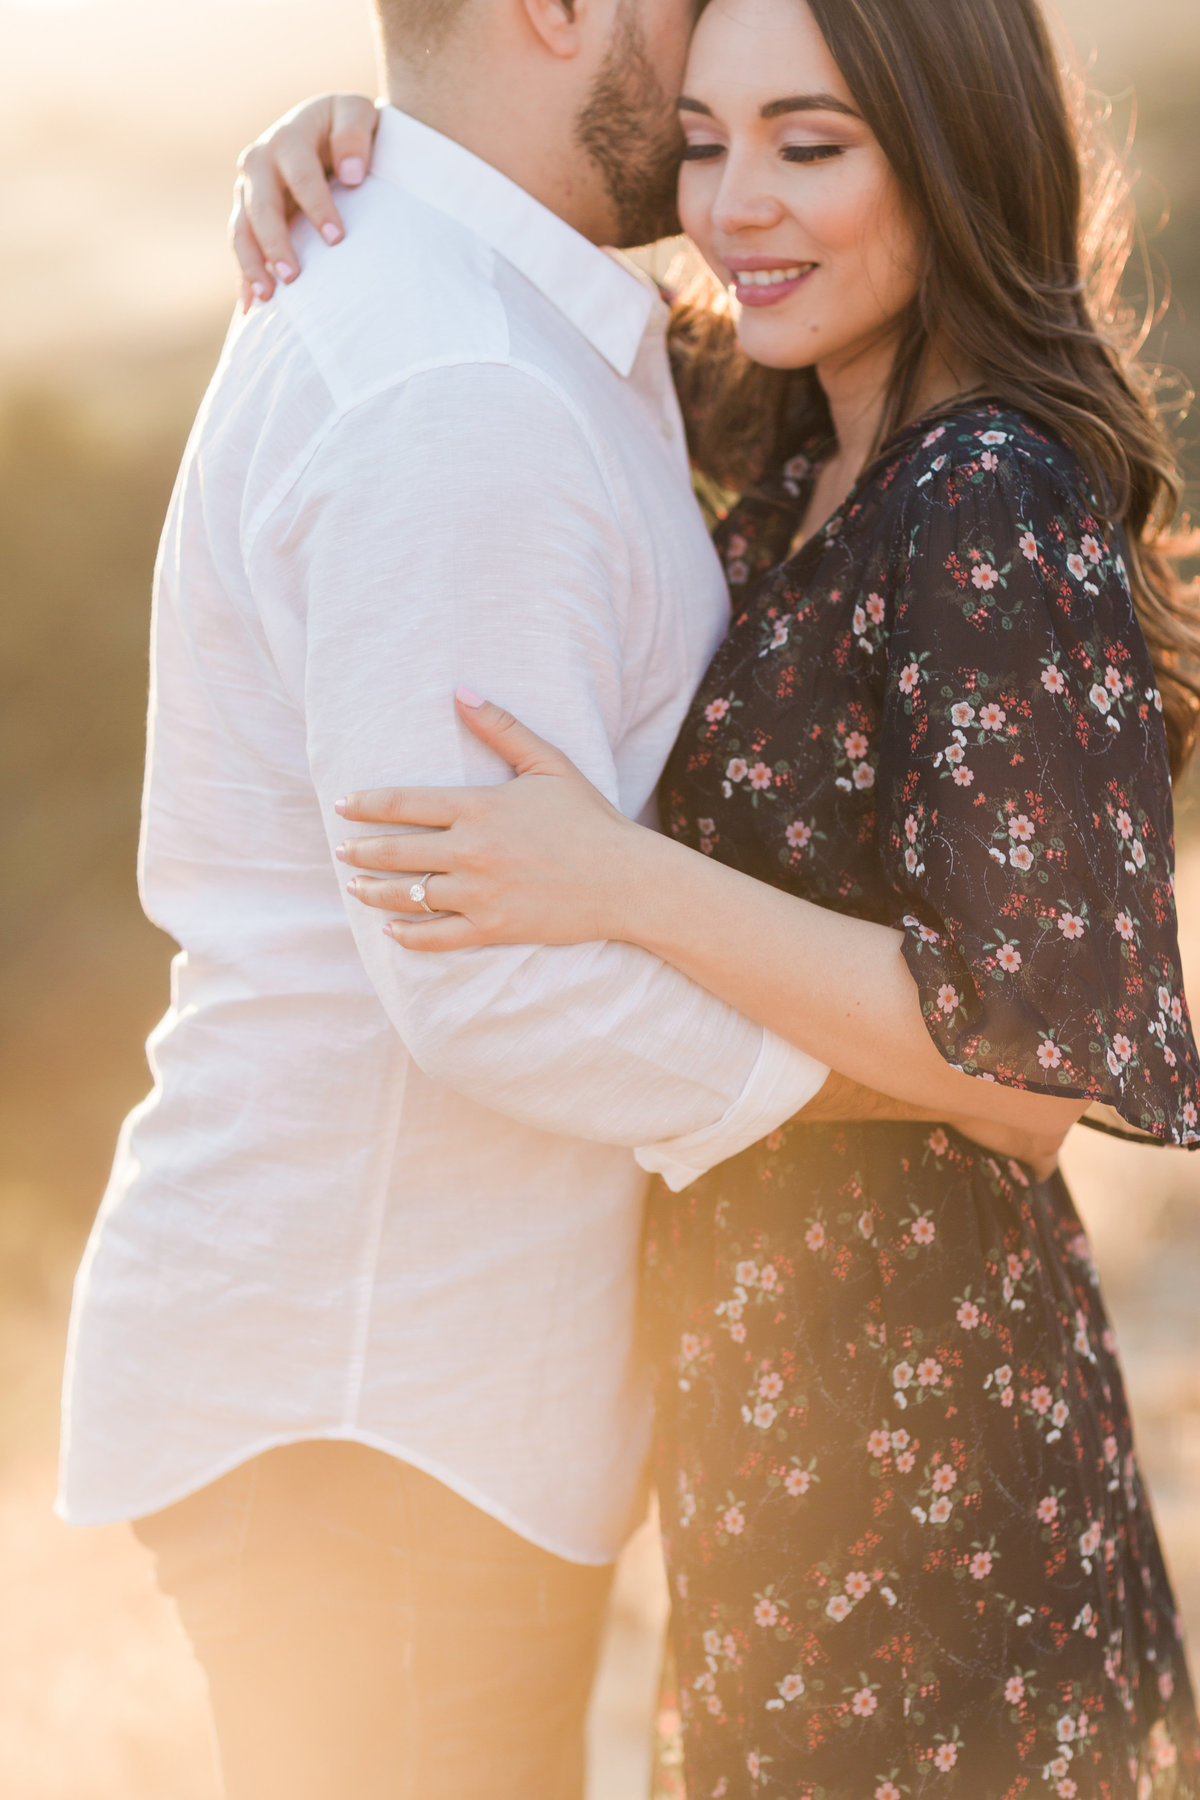 Malibu Creek State Park Engagement Session_Valorie Darling Photography-7462